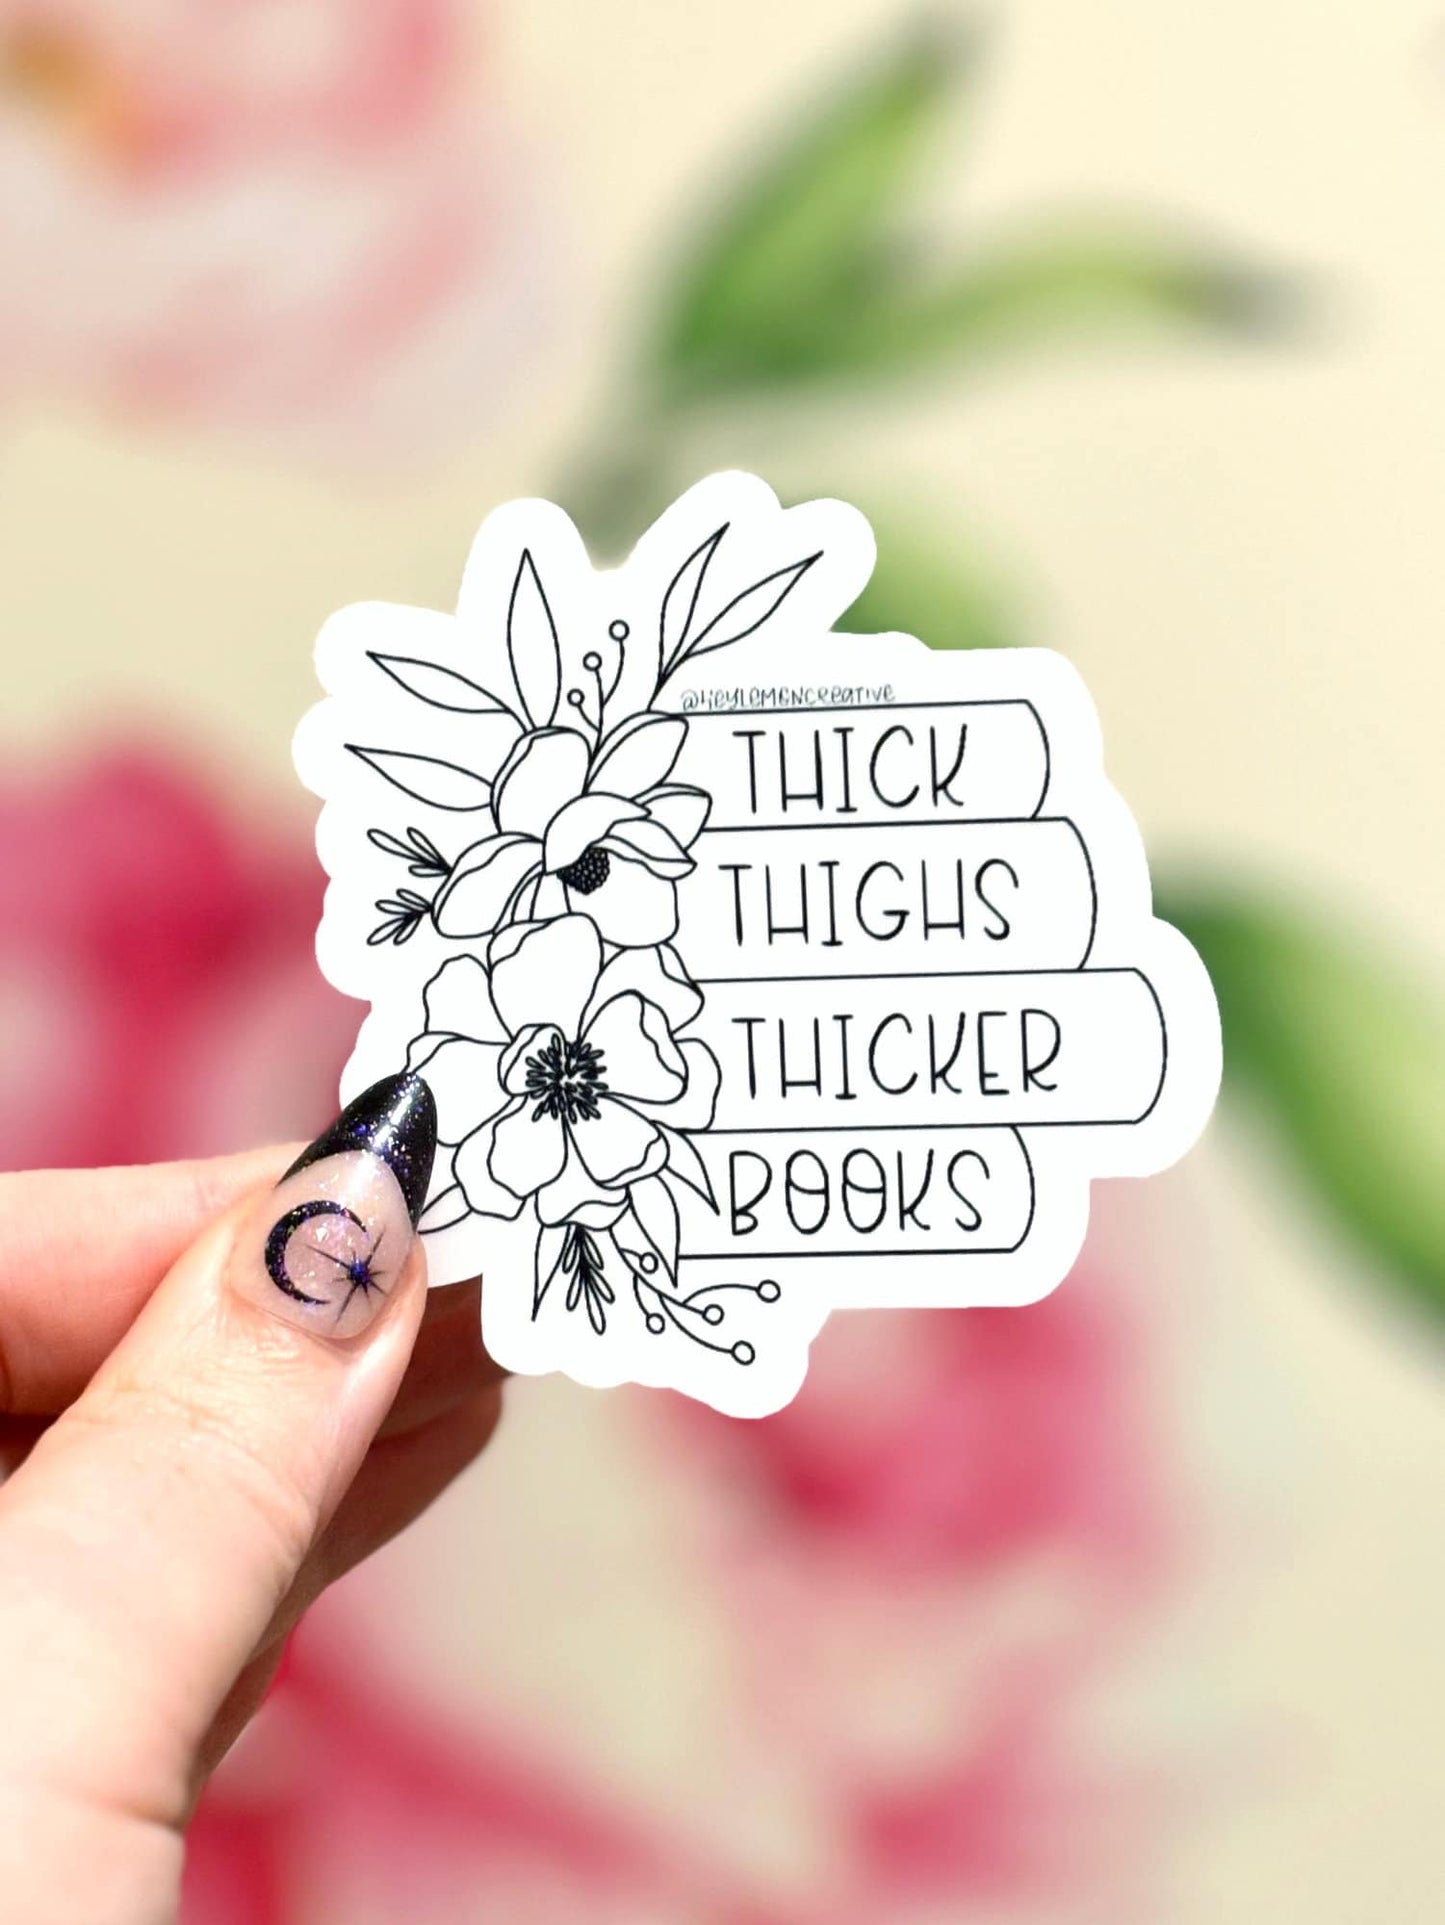 Thick Thighs Thicker Books Sticker